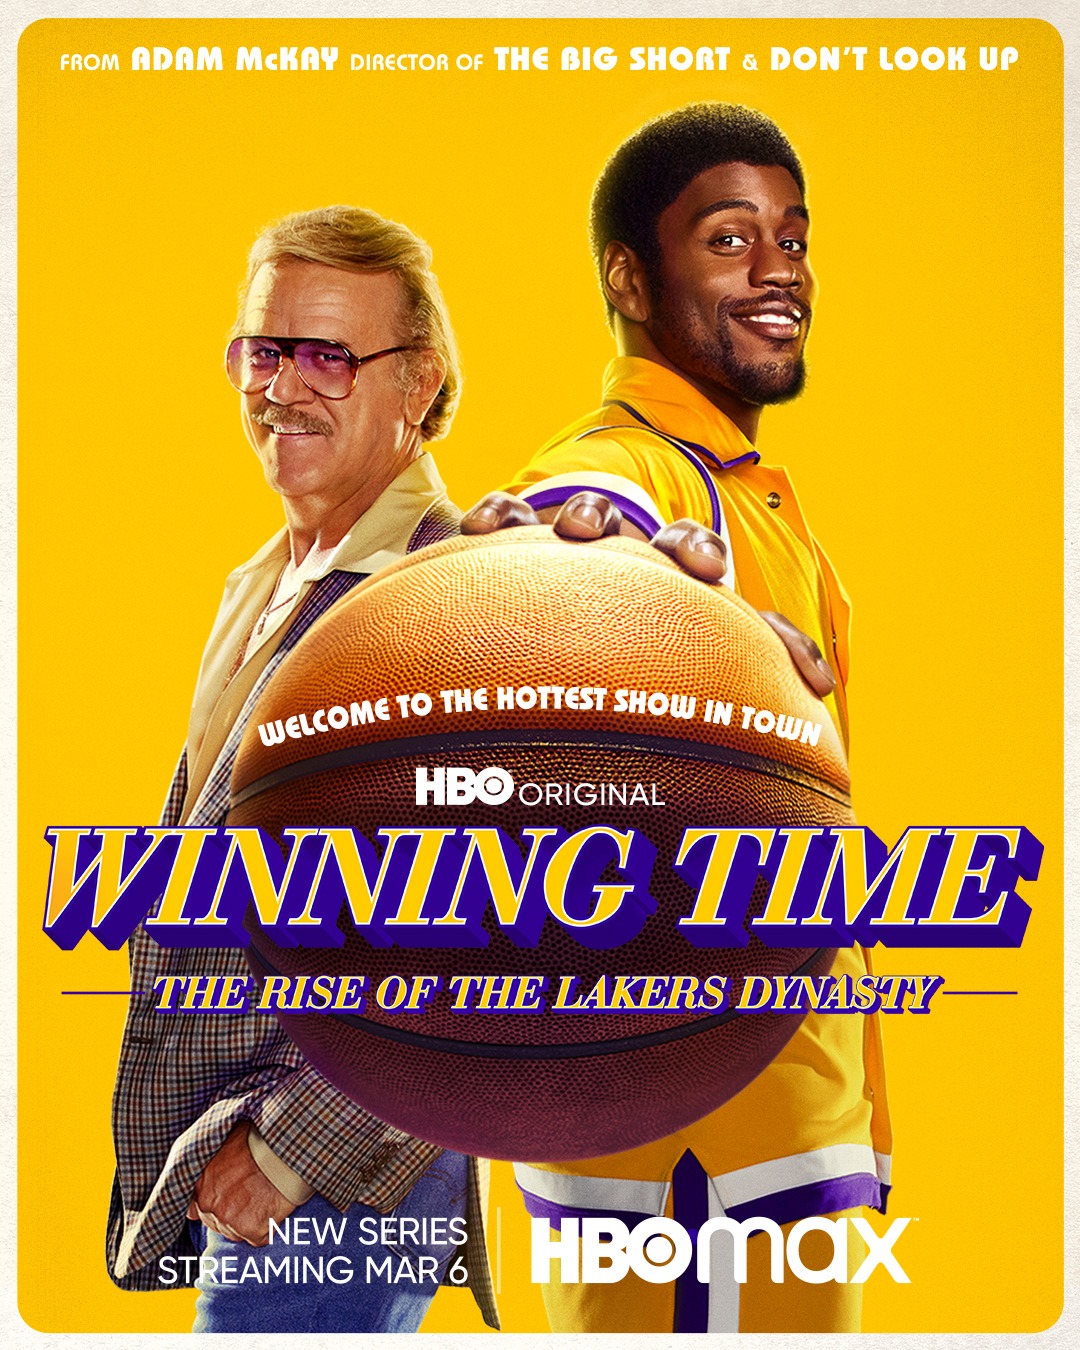 Adam McKay scores with HBO's Winning Time: The Rise of the Lakers Dynasty